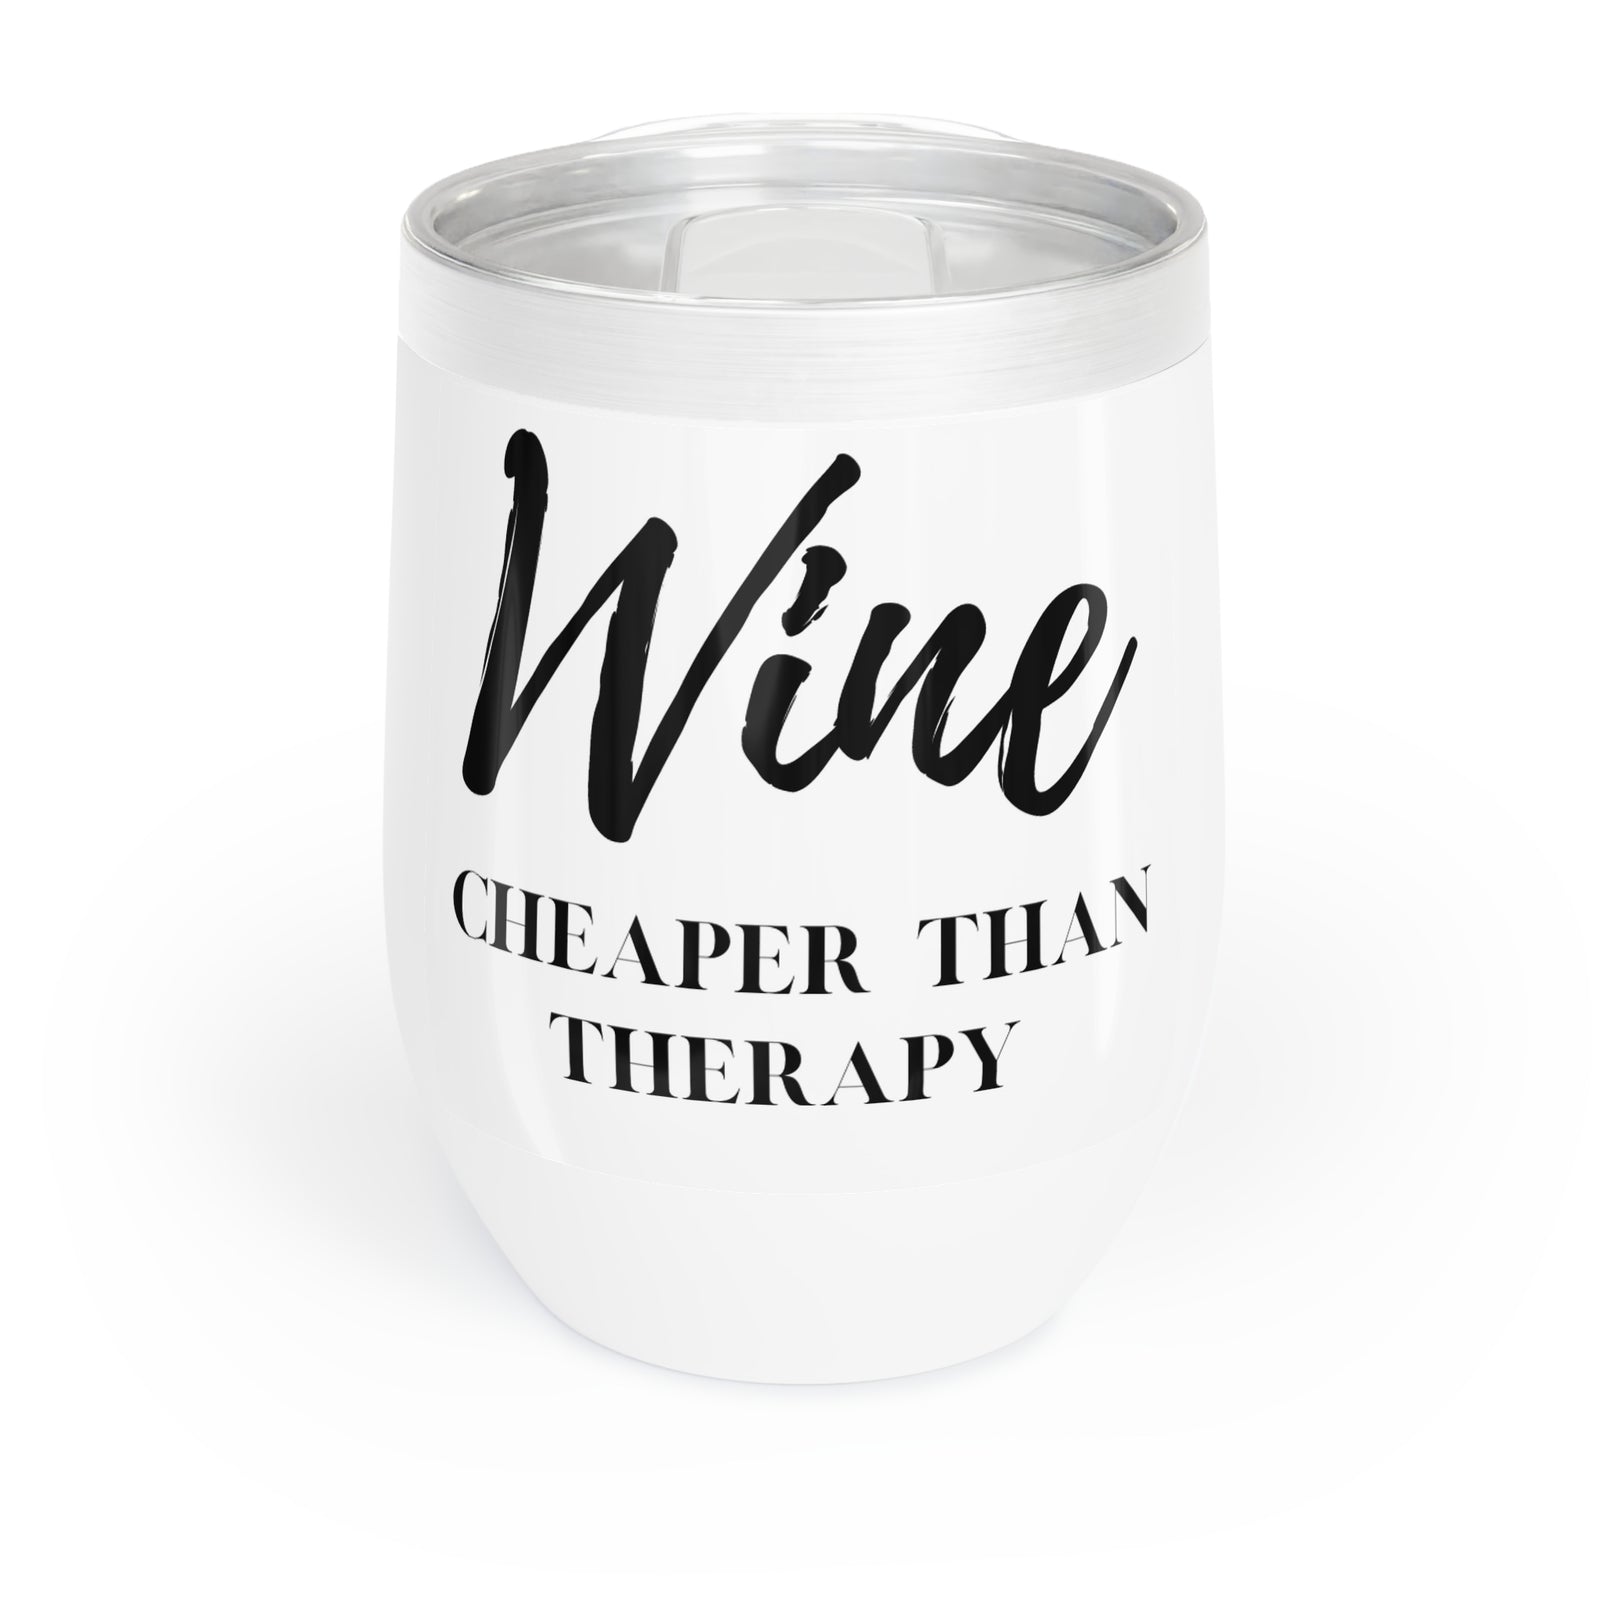 “Wine Cheaper Than Therapy” Tumbler